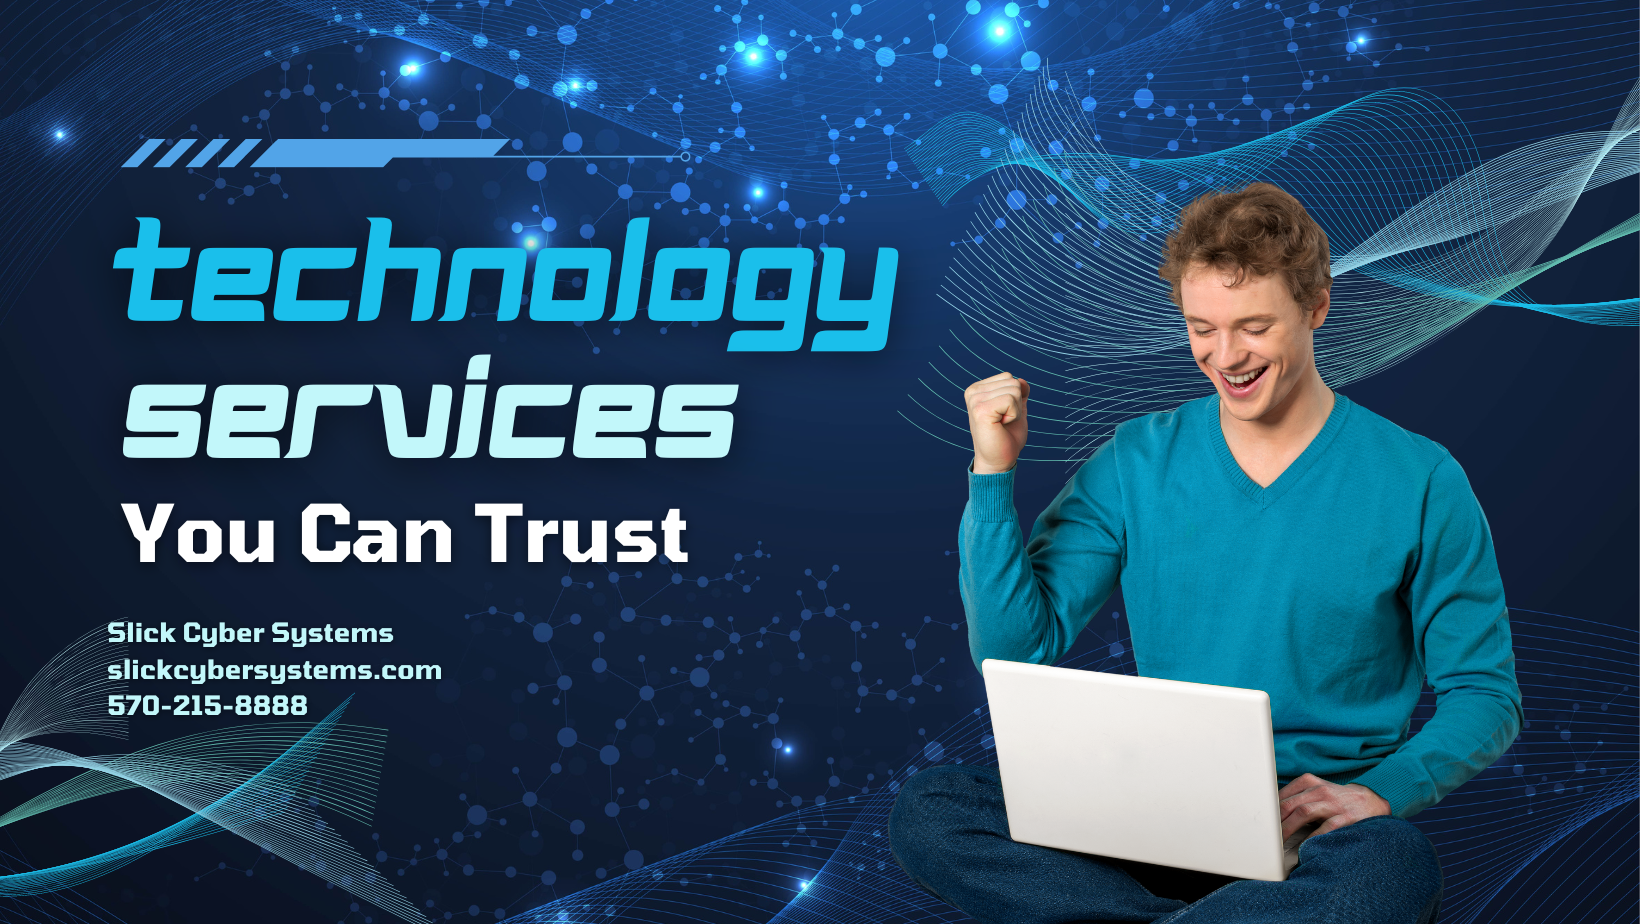 Technology Services You Can Trust